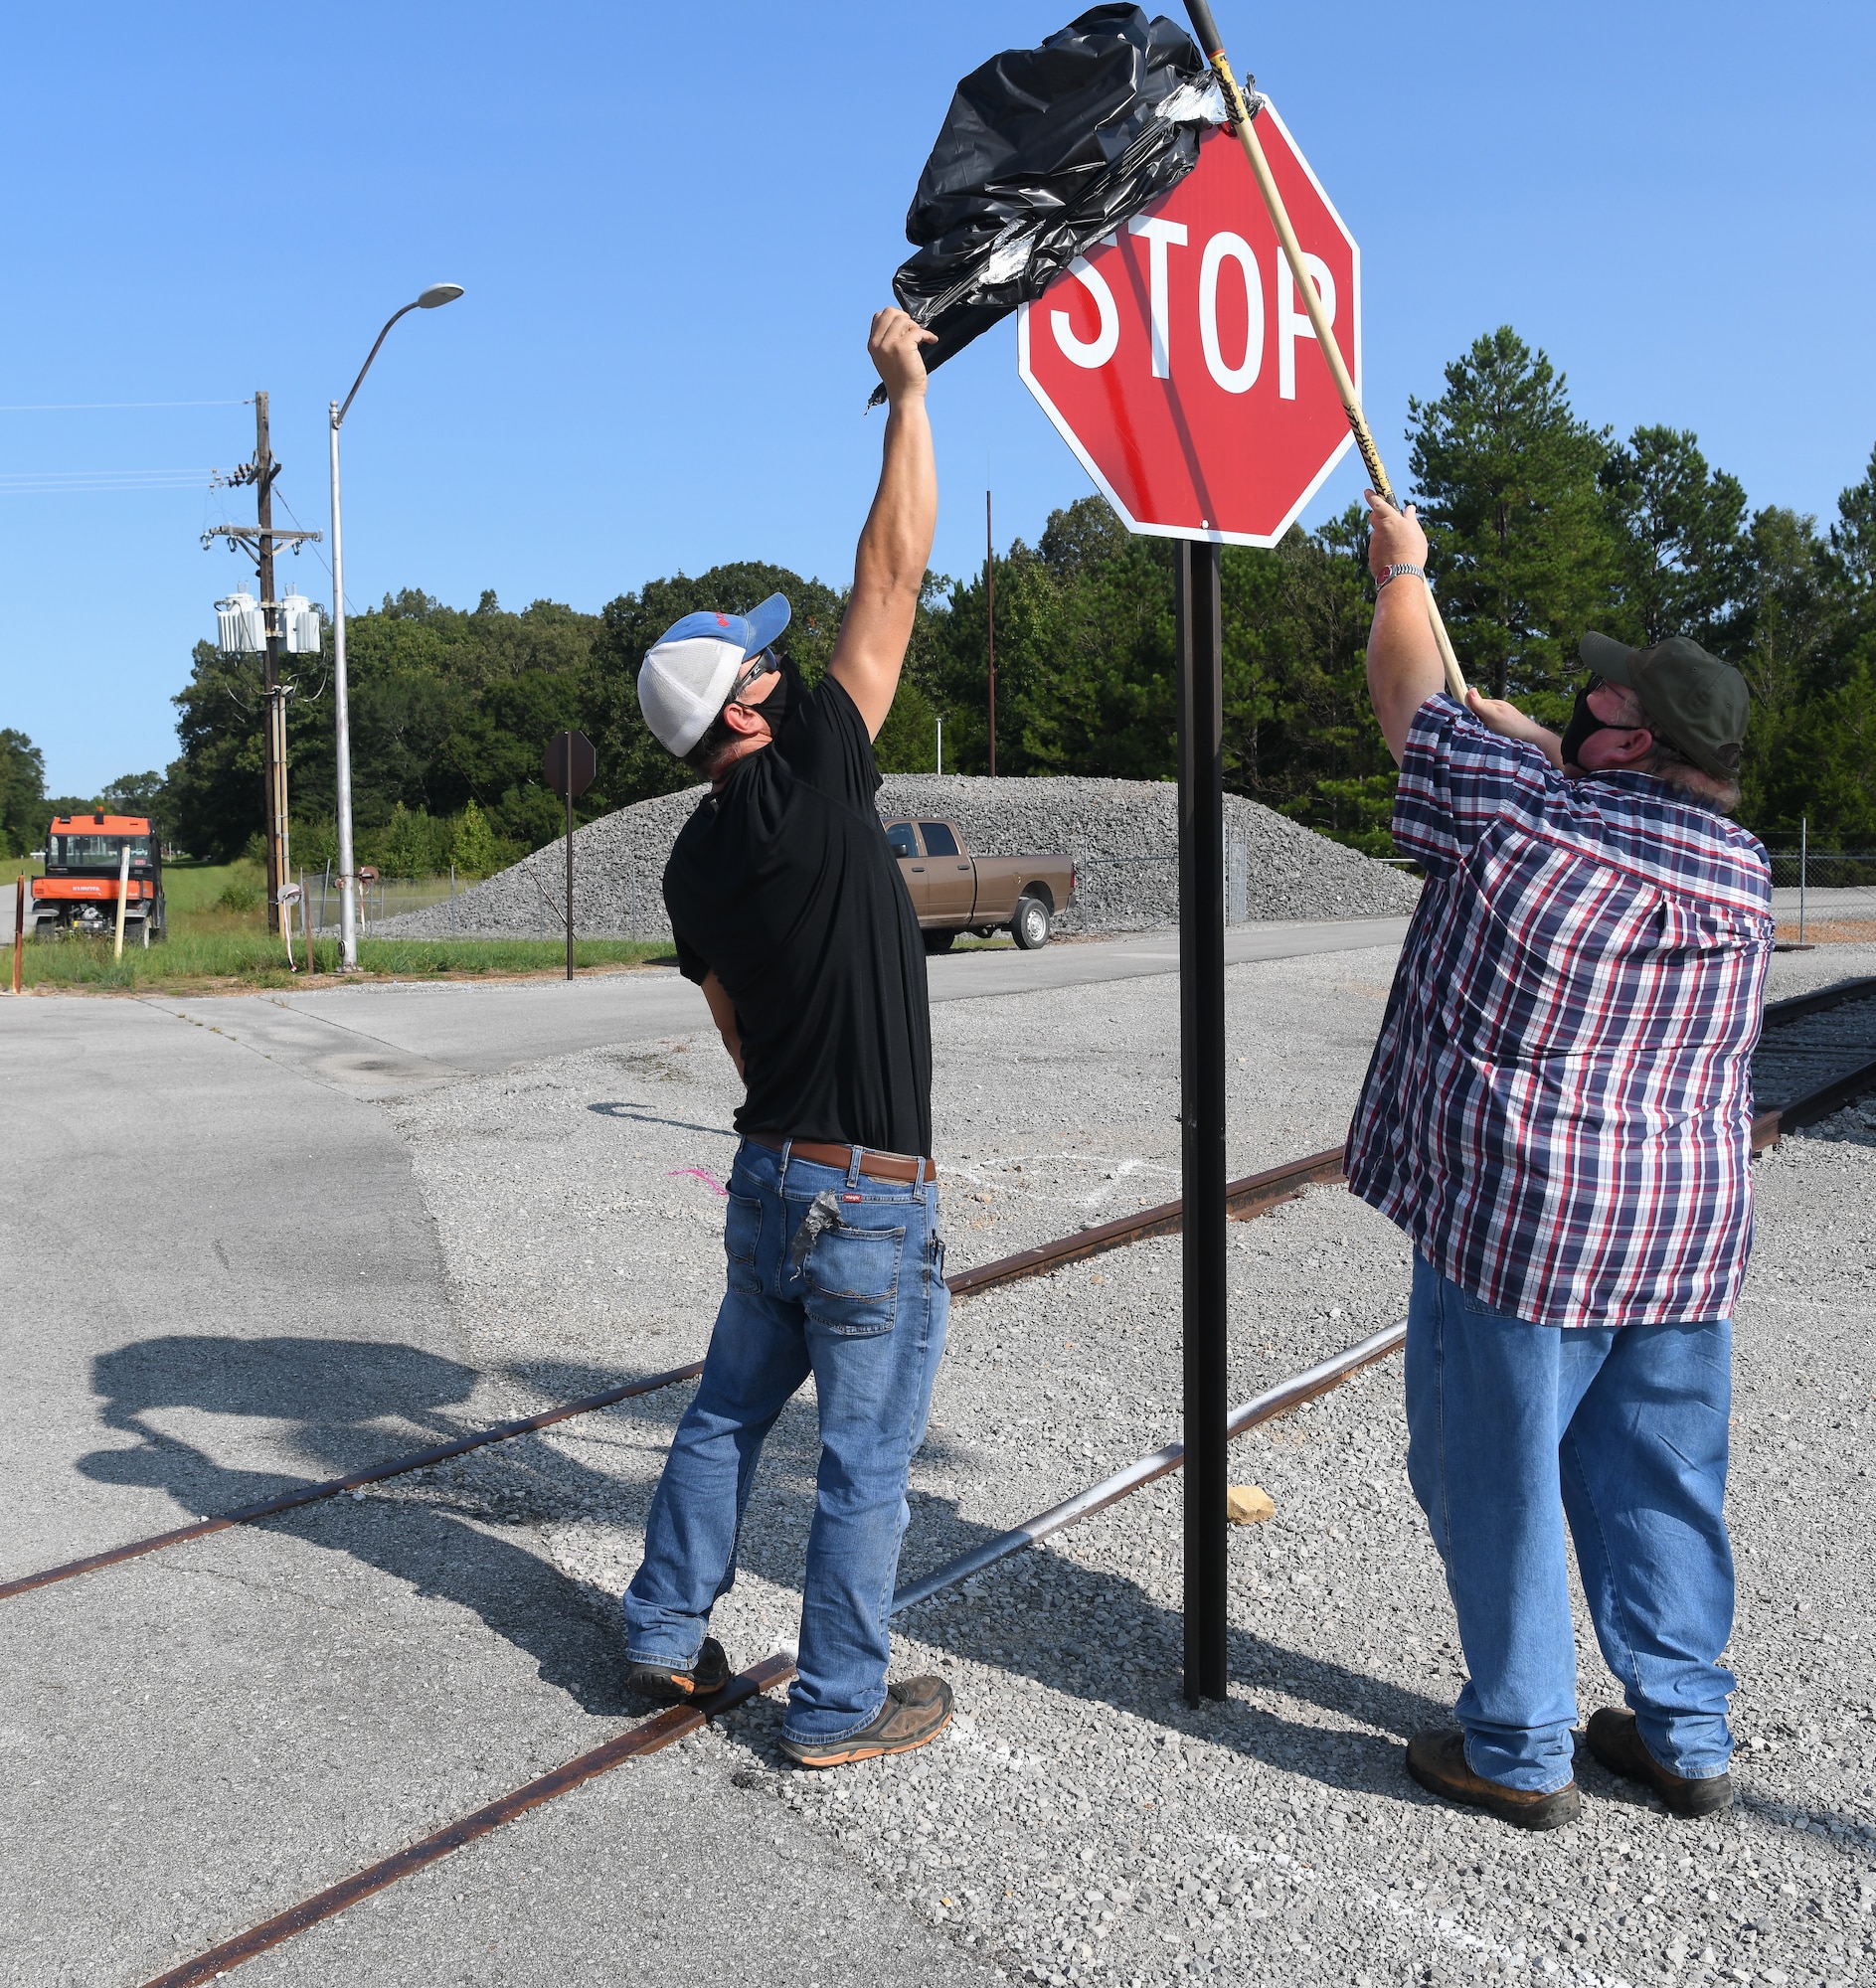 Laborers Danny Smartt, left, and Kelvin Sweeton uncover one of four stop signs installed at an intersection near the J-4 Rocket Motor Test Facility at Arnold Air Force Base, Tenn., Sept. 11, 2020. The signs were uncovered after craftsmen were notified of their installation during toolbox meetings. (U.S. Air Force photo by Jill Pickett)